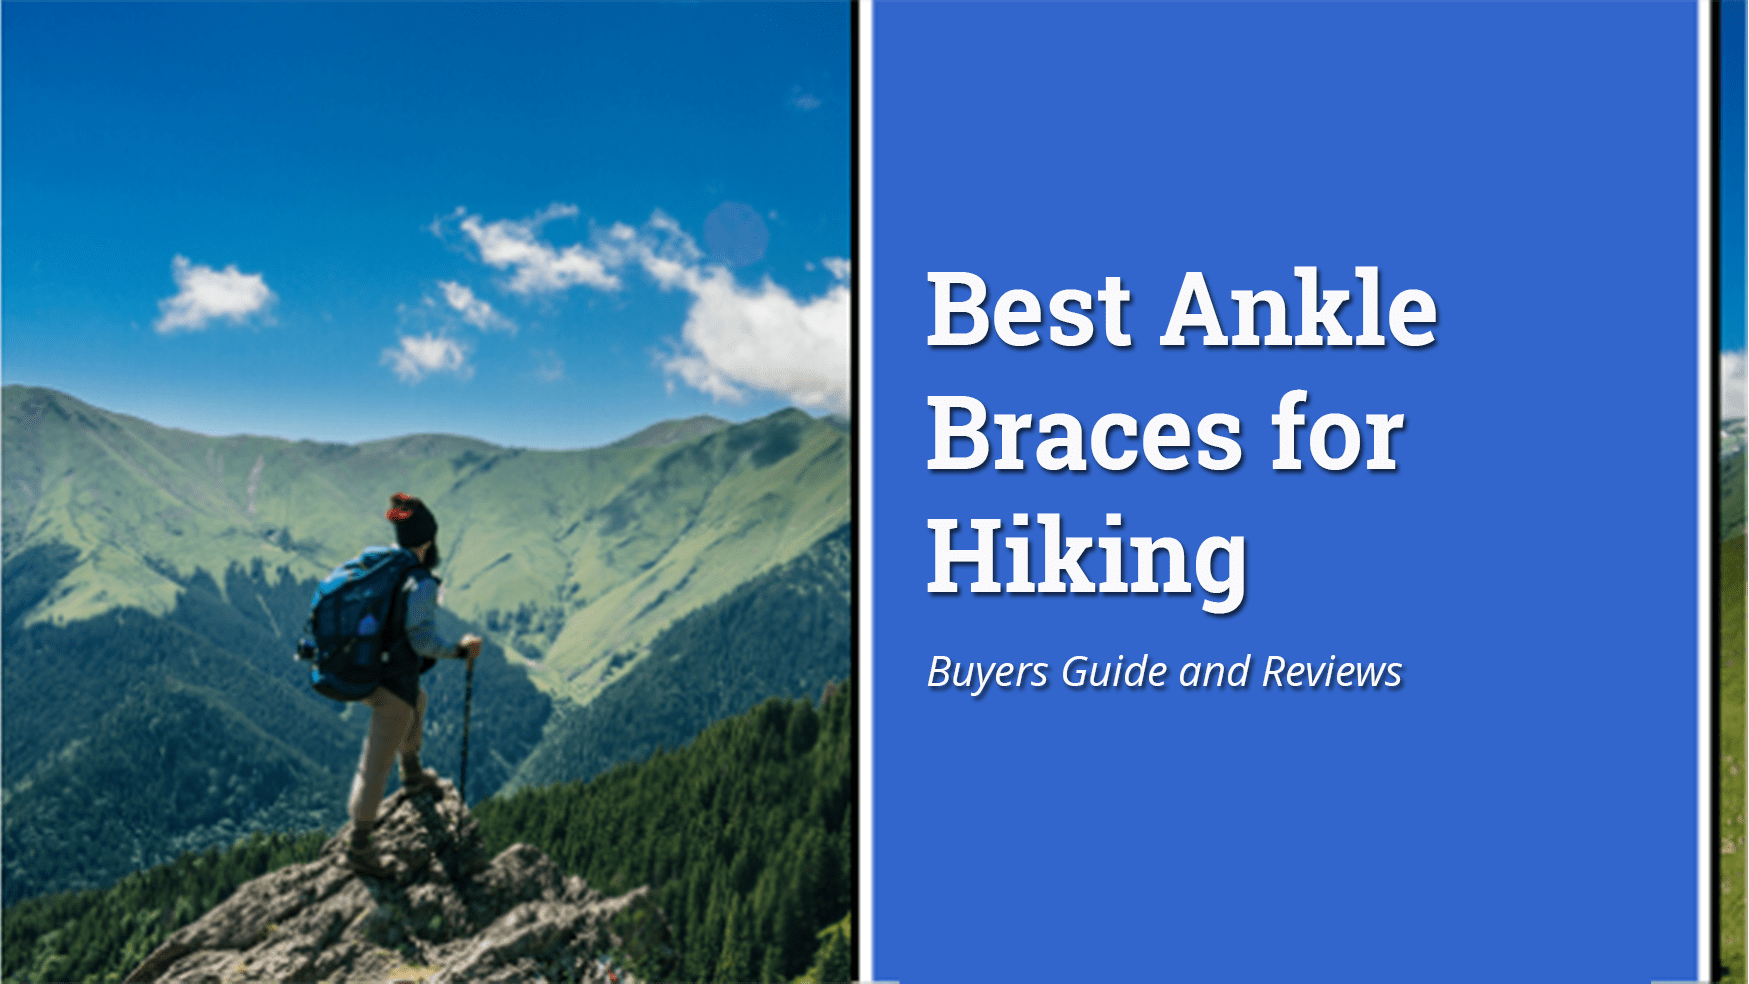 Top 5 Best Ankle Brace for hiking 2020 